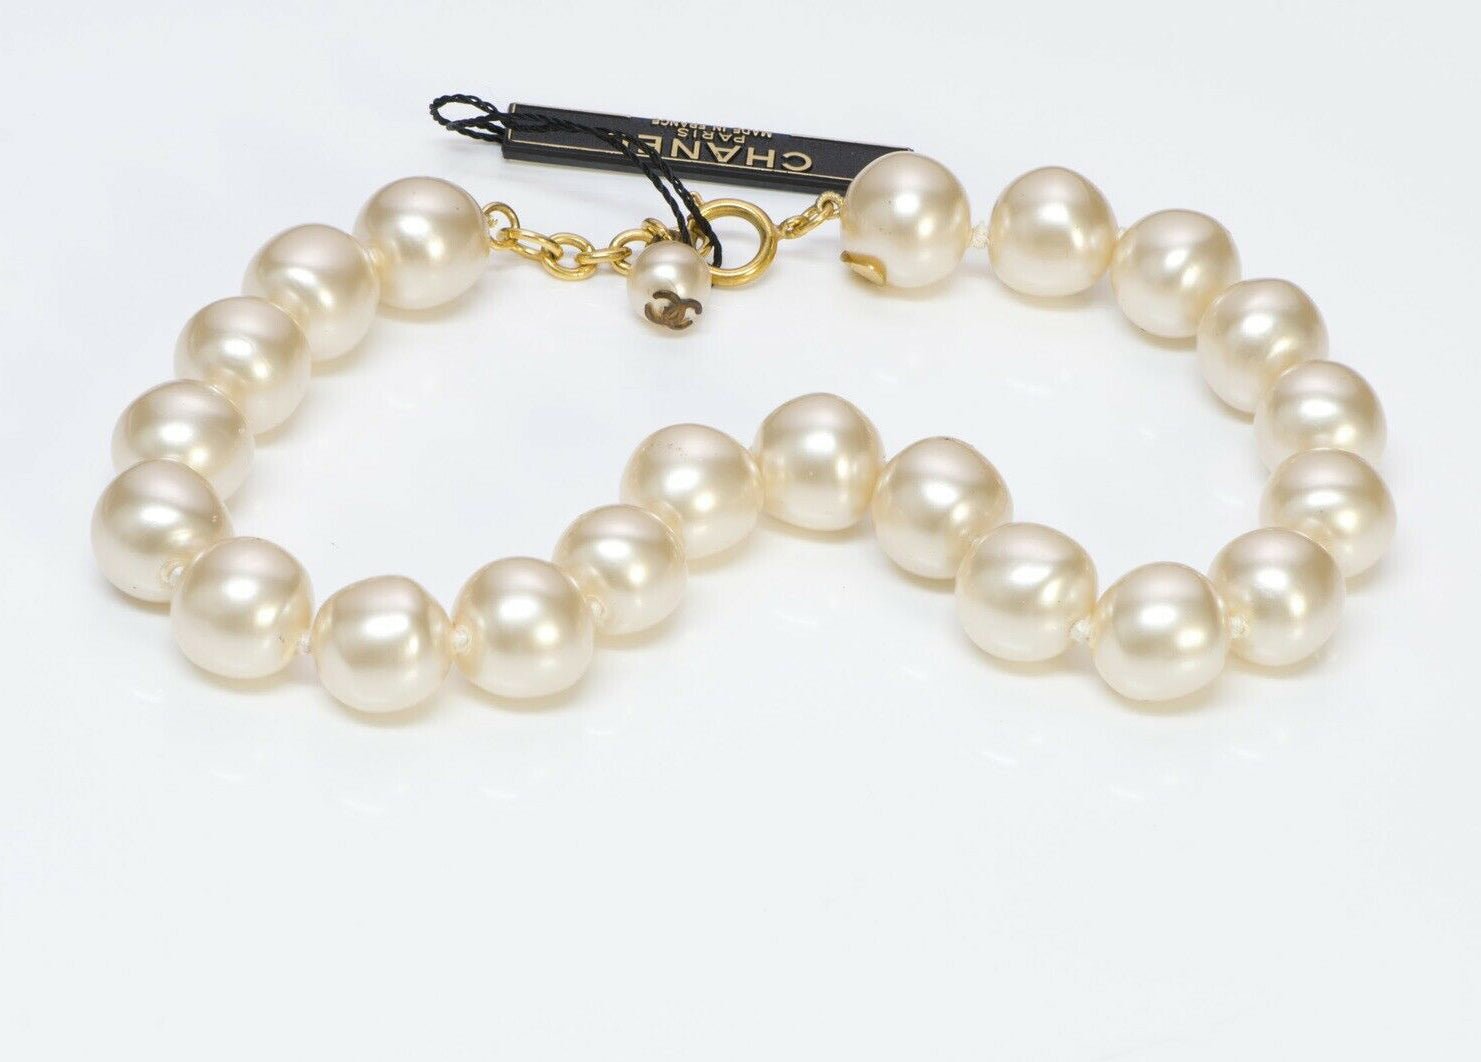 CHANEL Paris 1990’s Large Pearls Choker Necklace - DSF Antique Jewelry